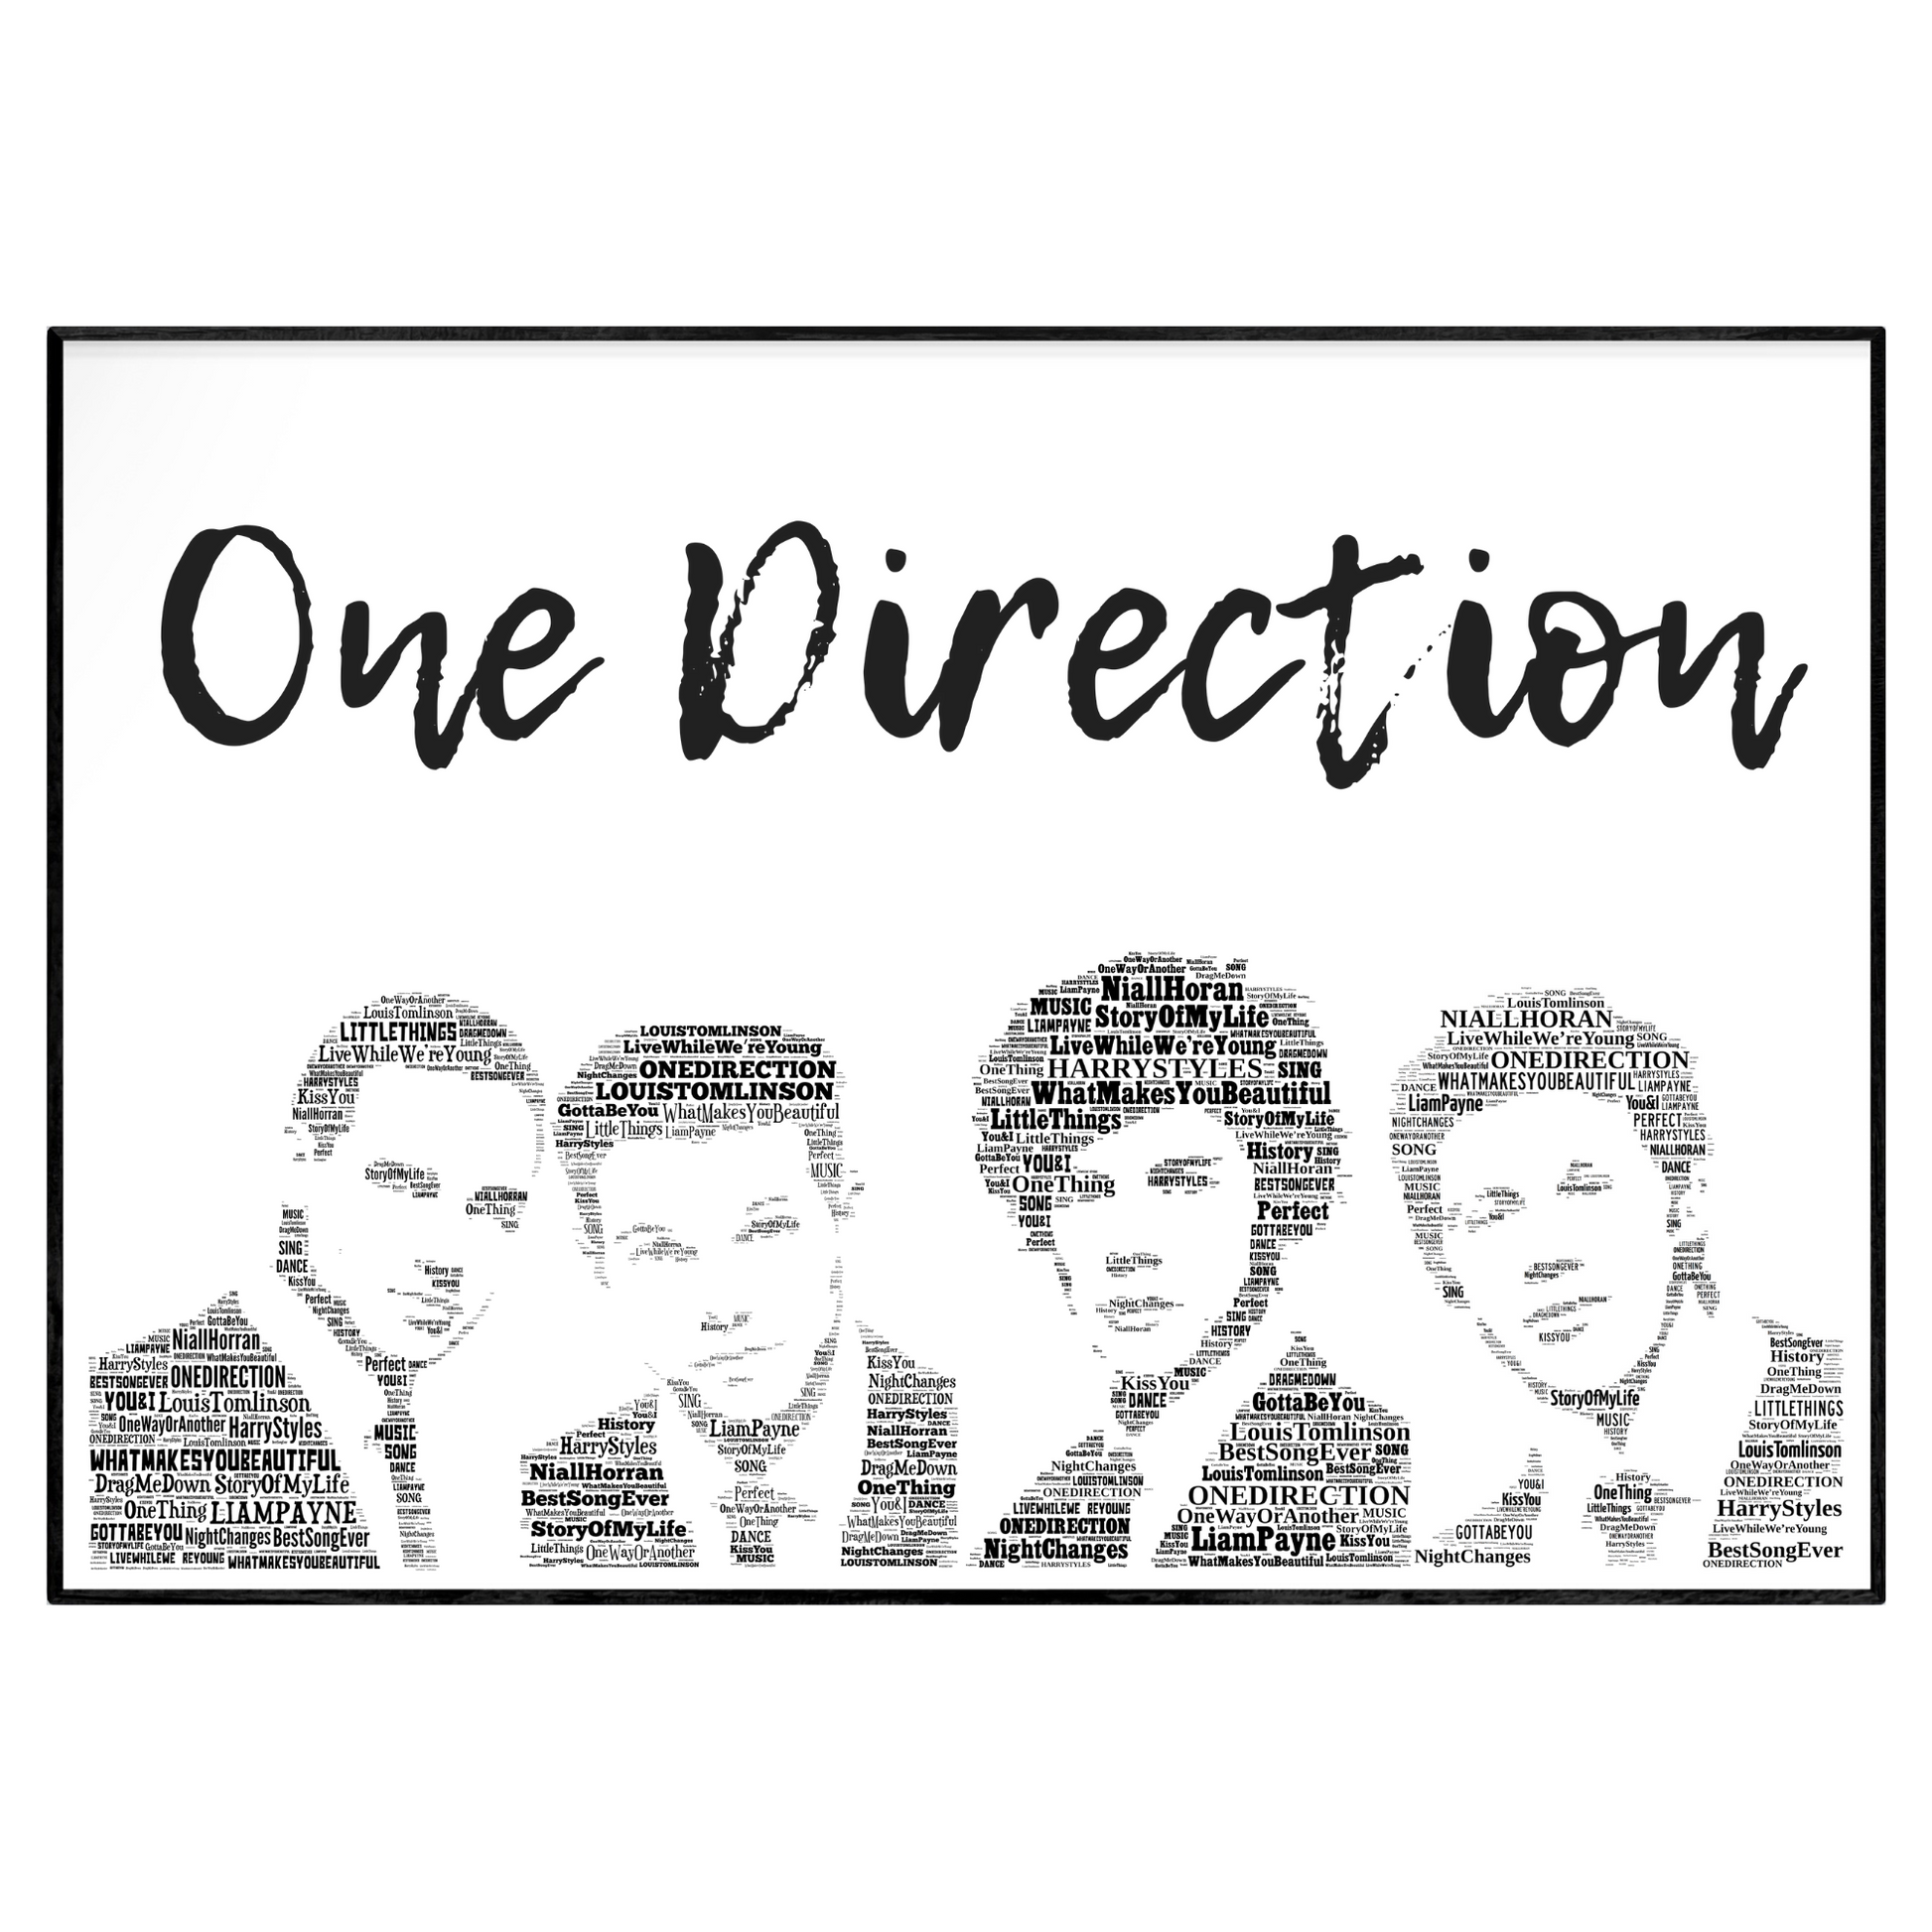 One direction d